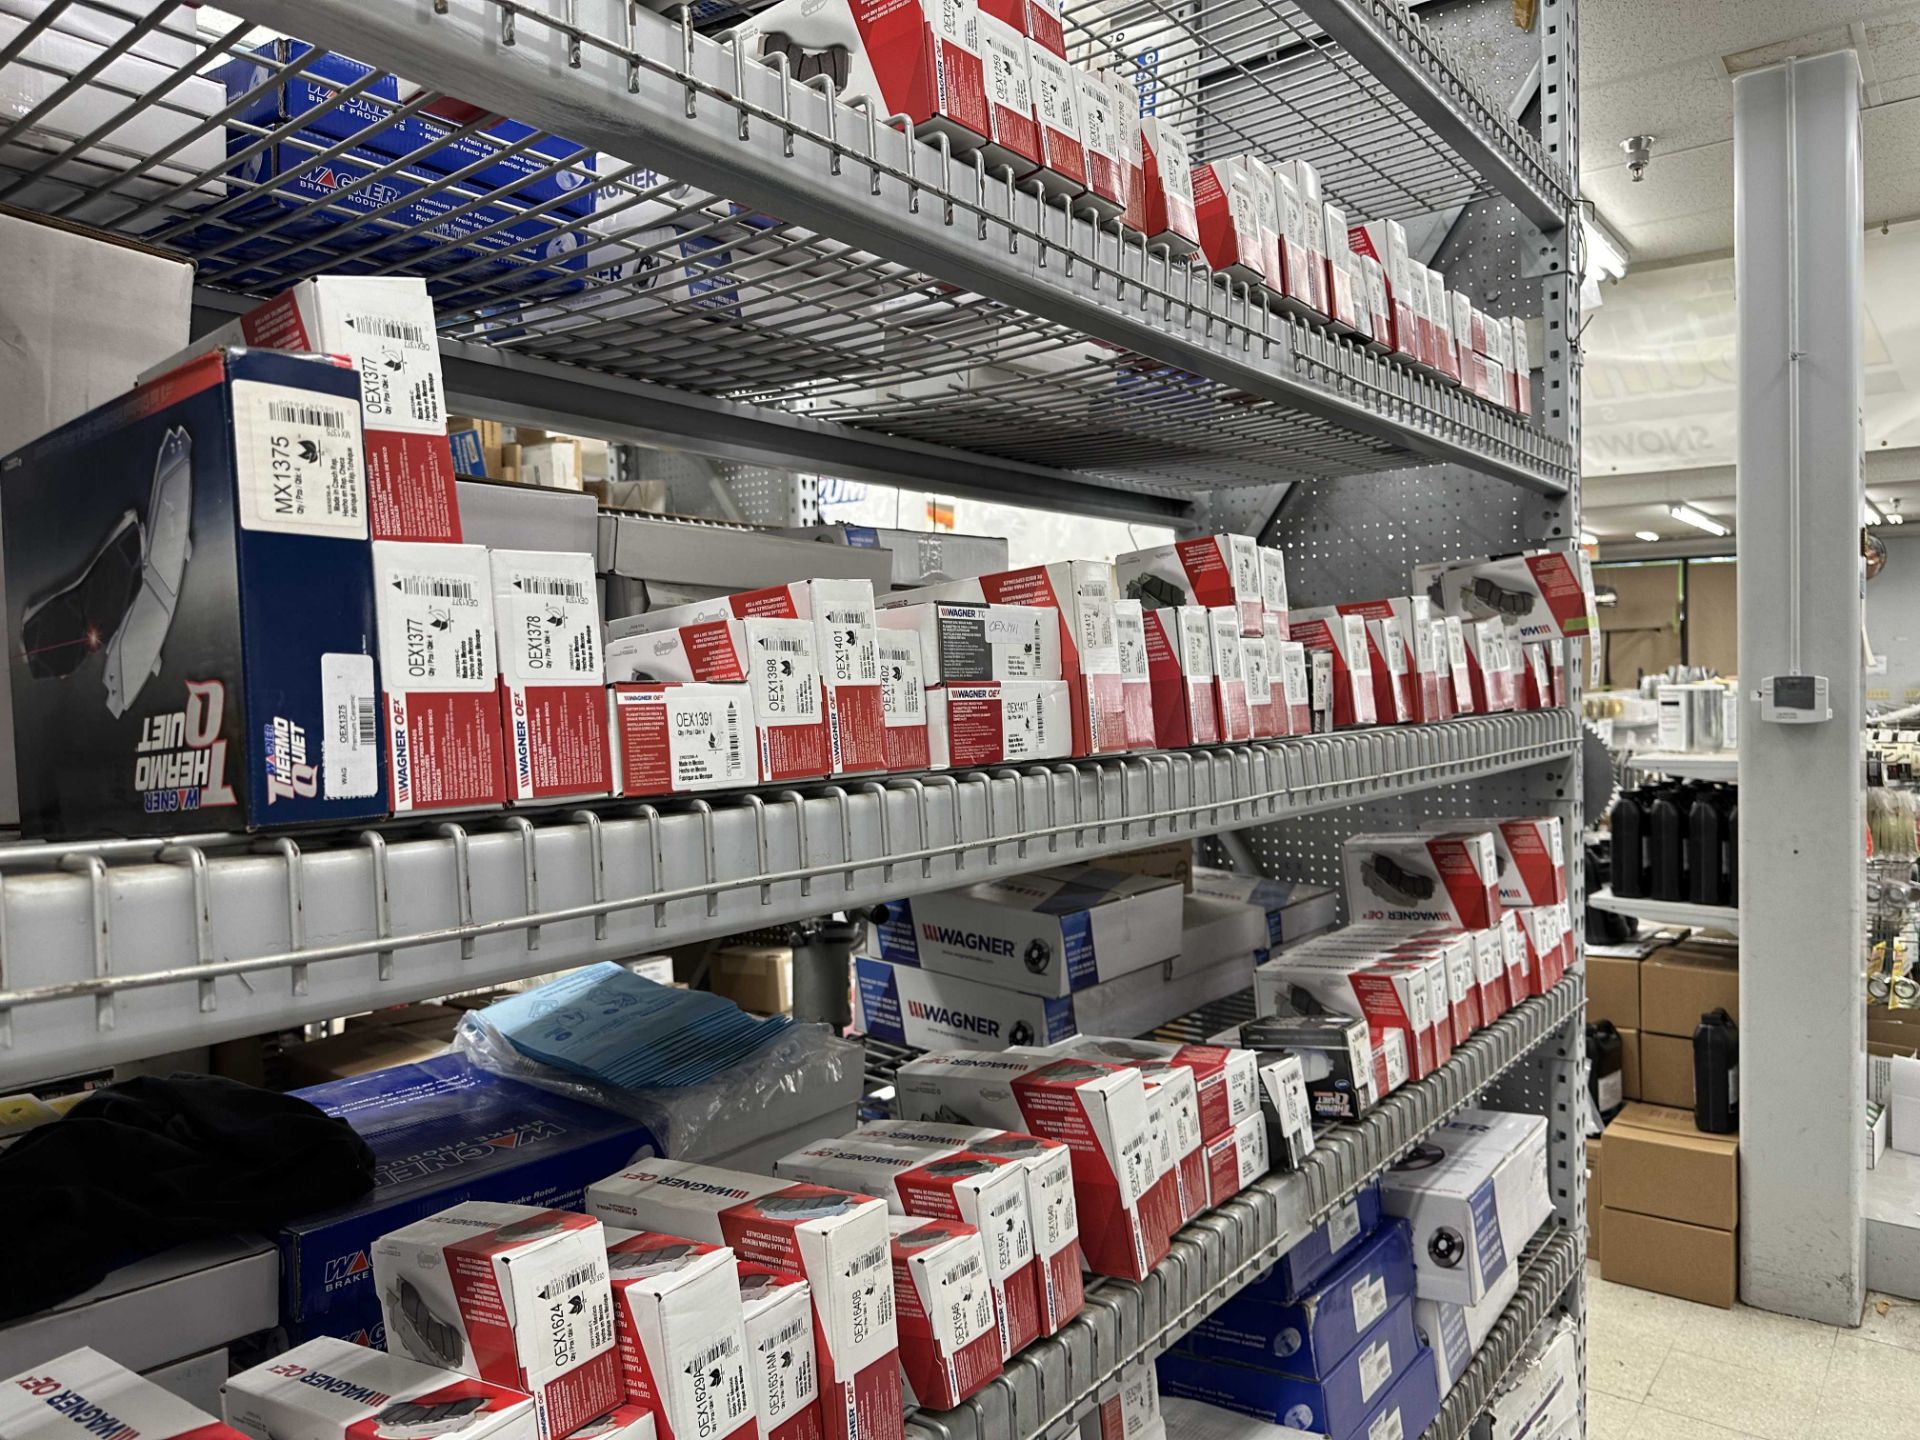 {LOT} Wagner OEX Brake Pads Appx. (198) Sets @ 5700 Wholesale Cost on ( 6) Shelves ( All Red Boxes ) - Image 2 of 2